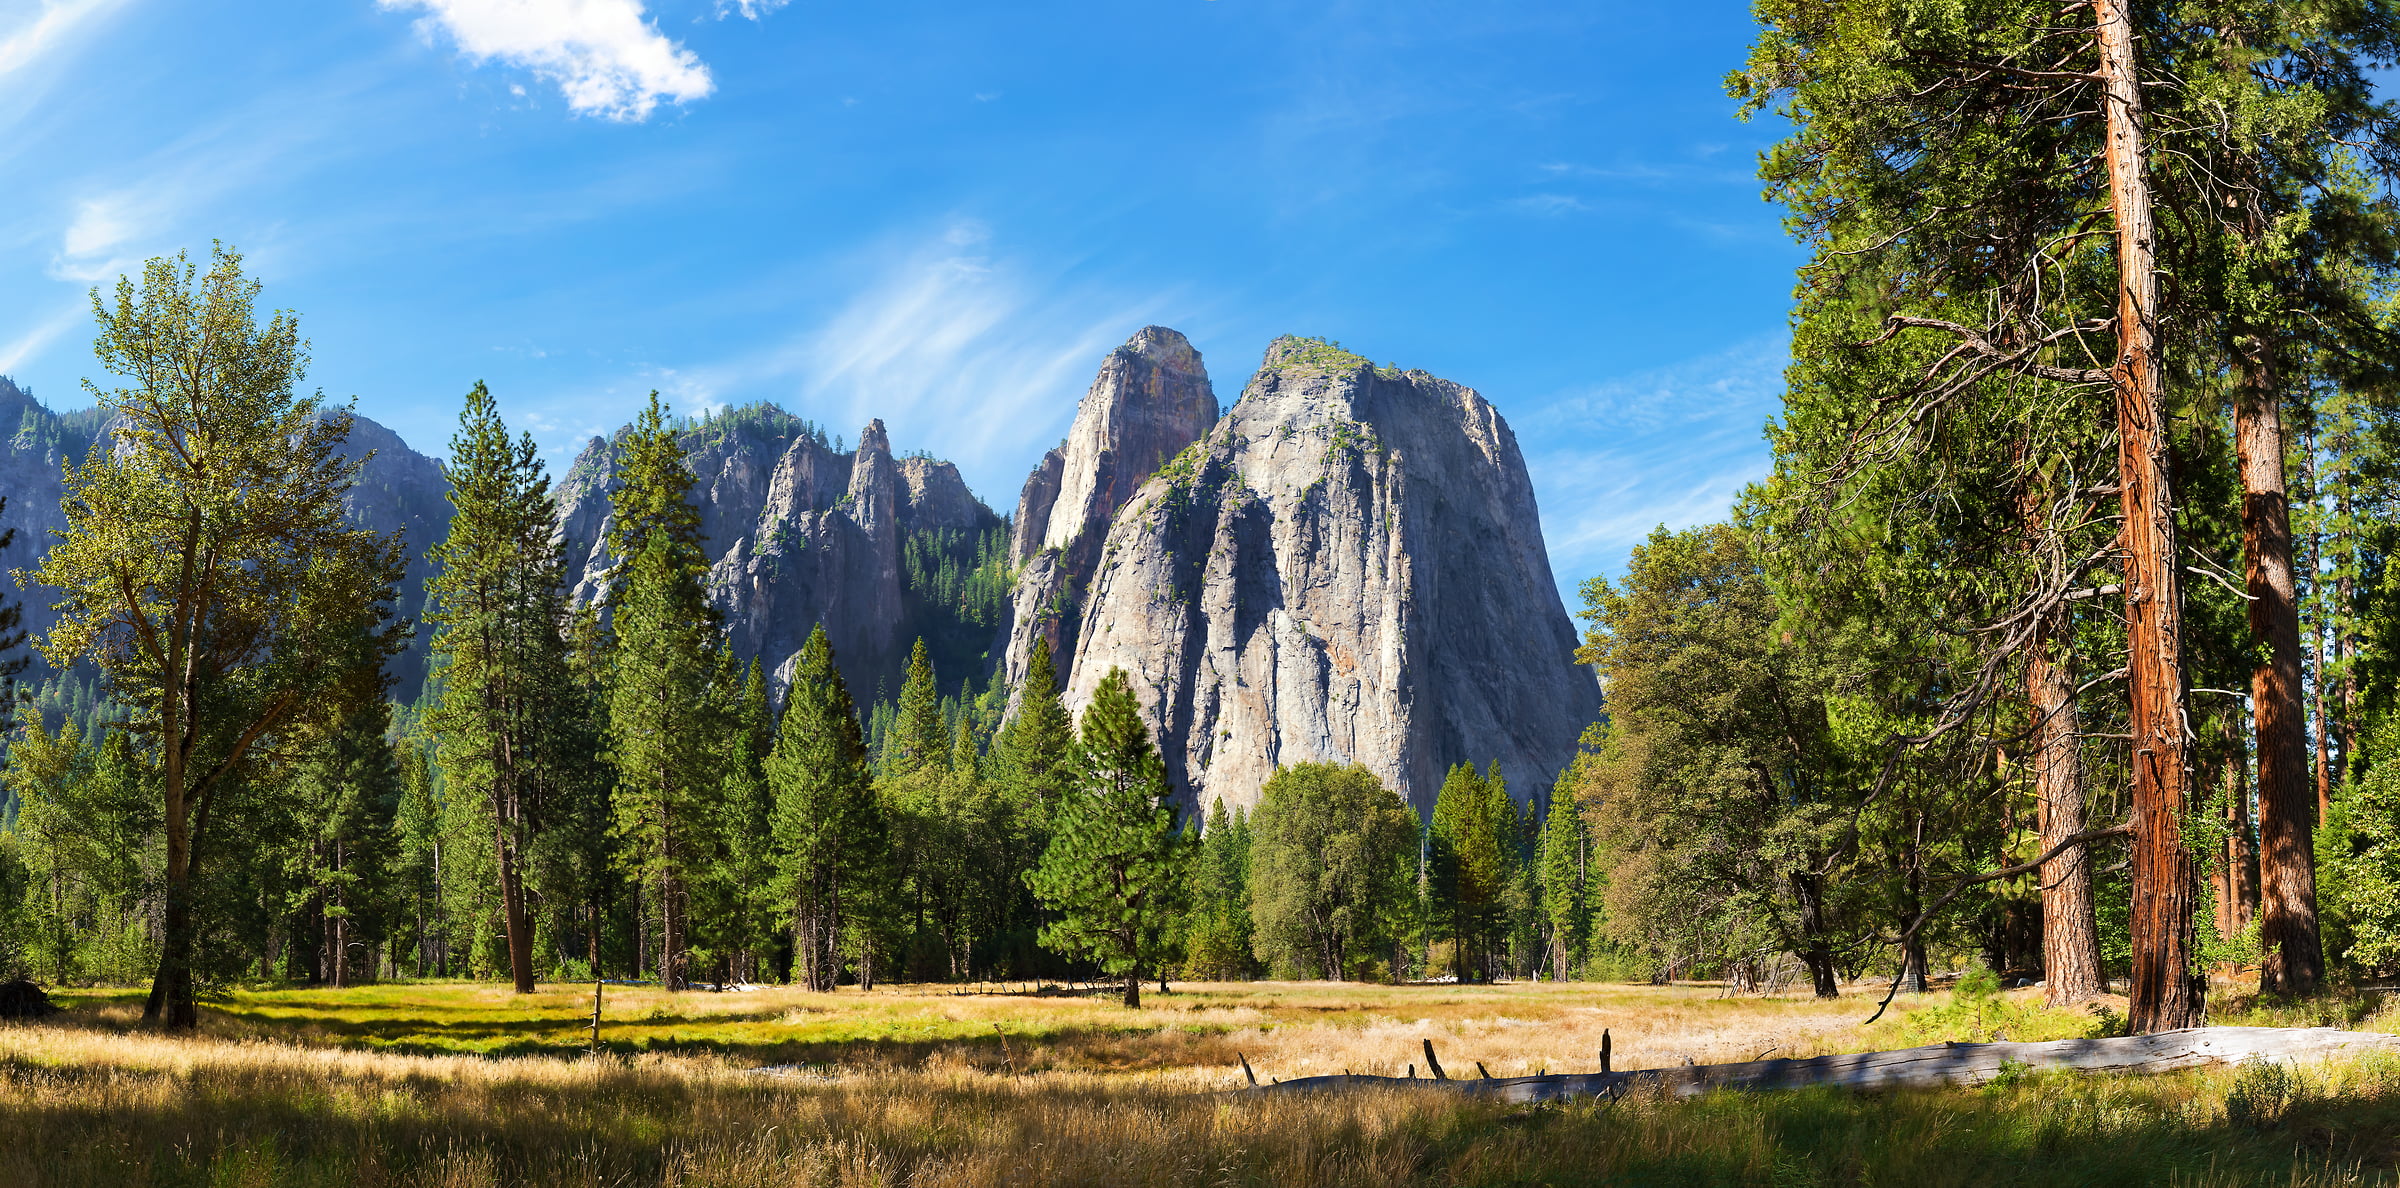 267 megapixels! A very high resolution, large-format VAST photo of Yosemite National Park with beautiful geological formations; landscape photograph created by Jim Tarpo in California.